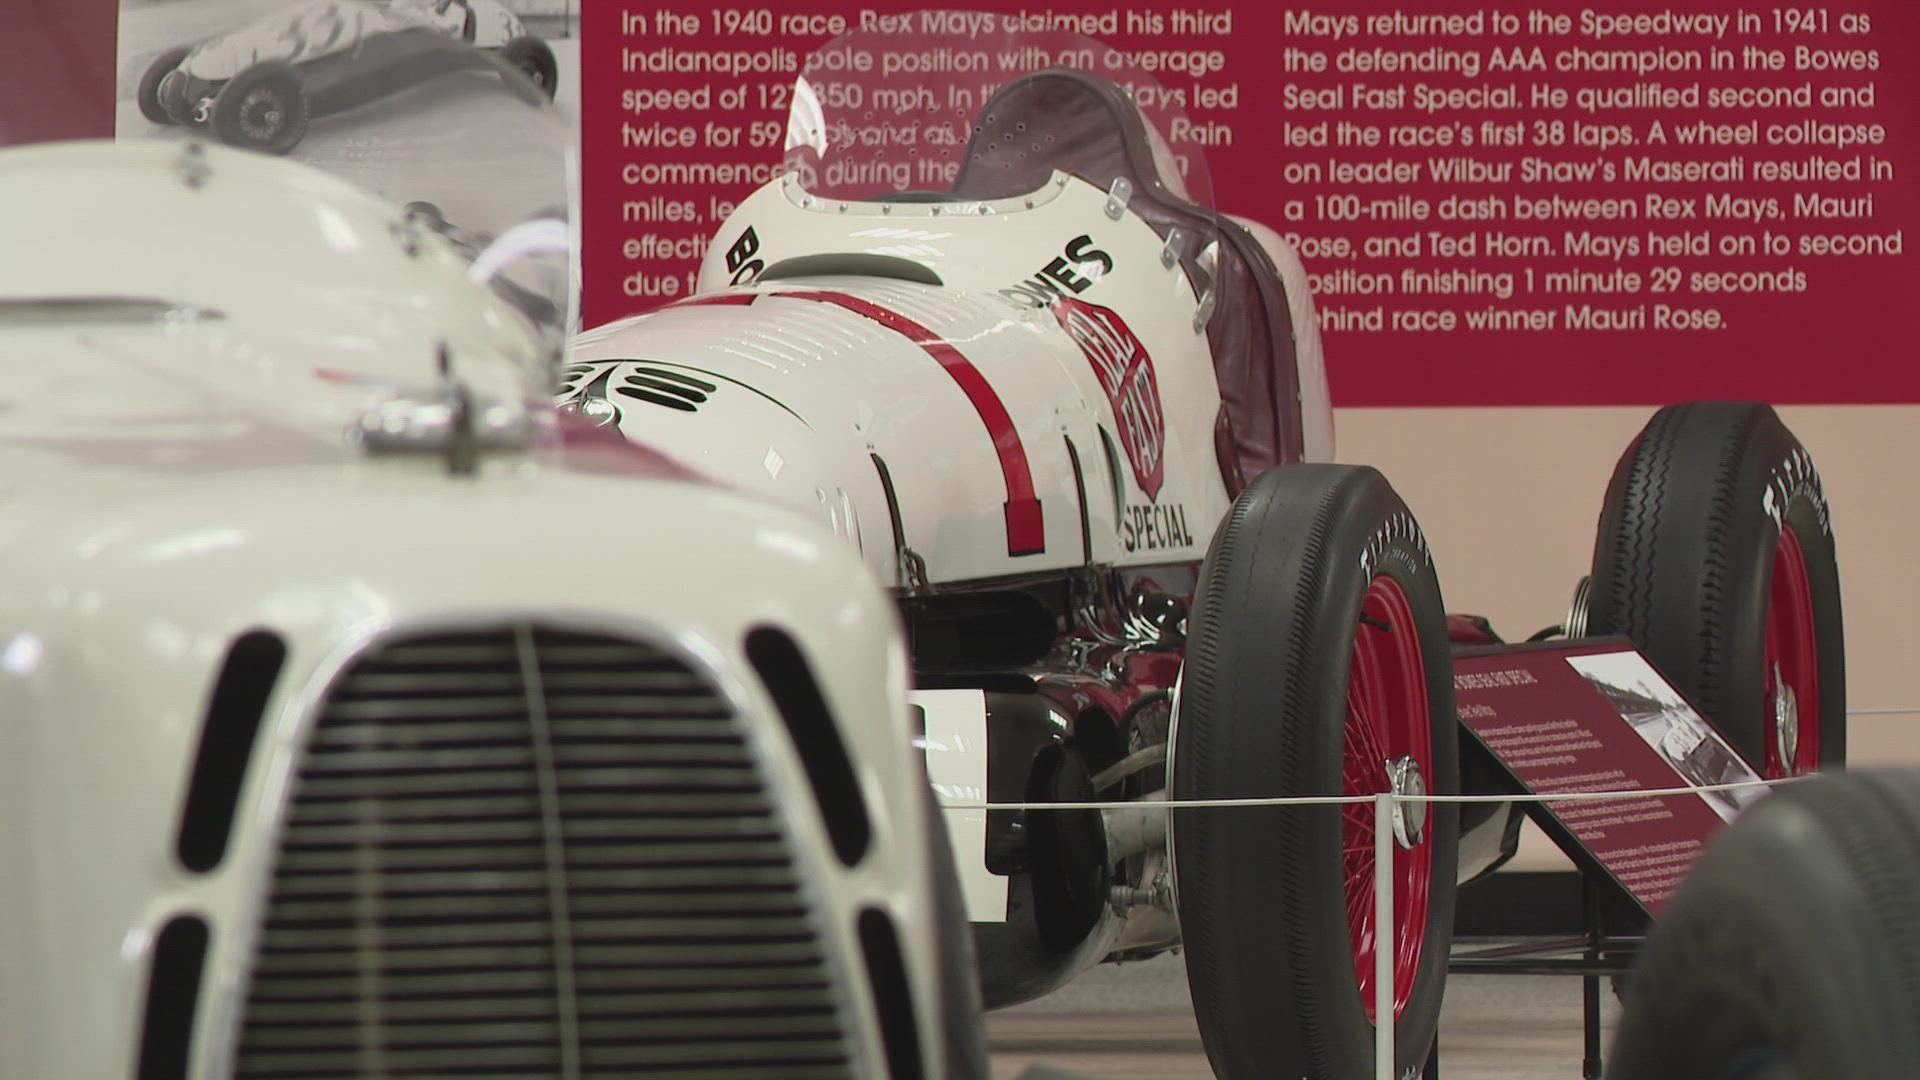 The exhibit focuses on drivers in the Indianapolis 500 who finished in second place.